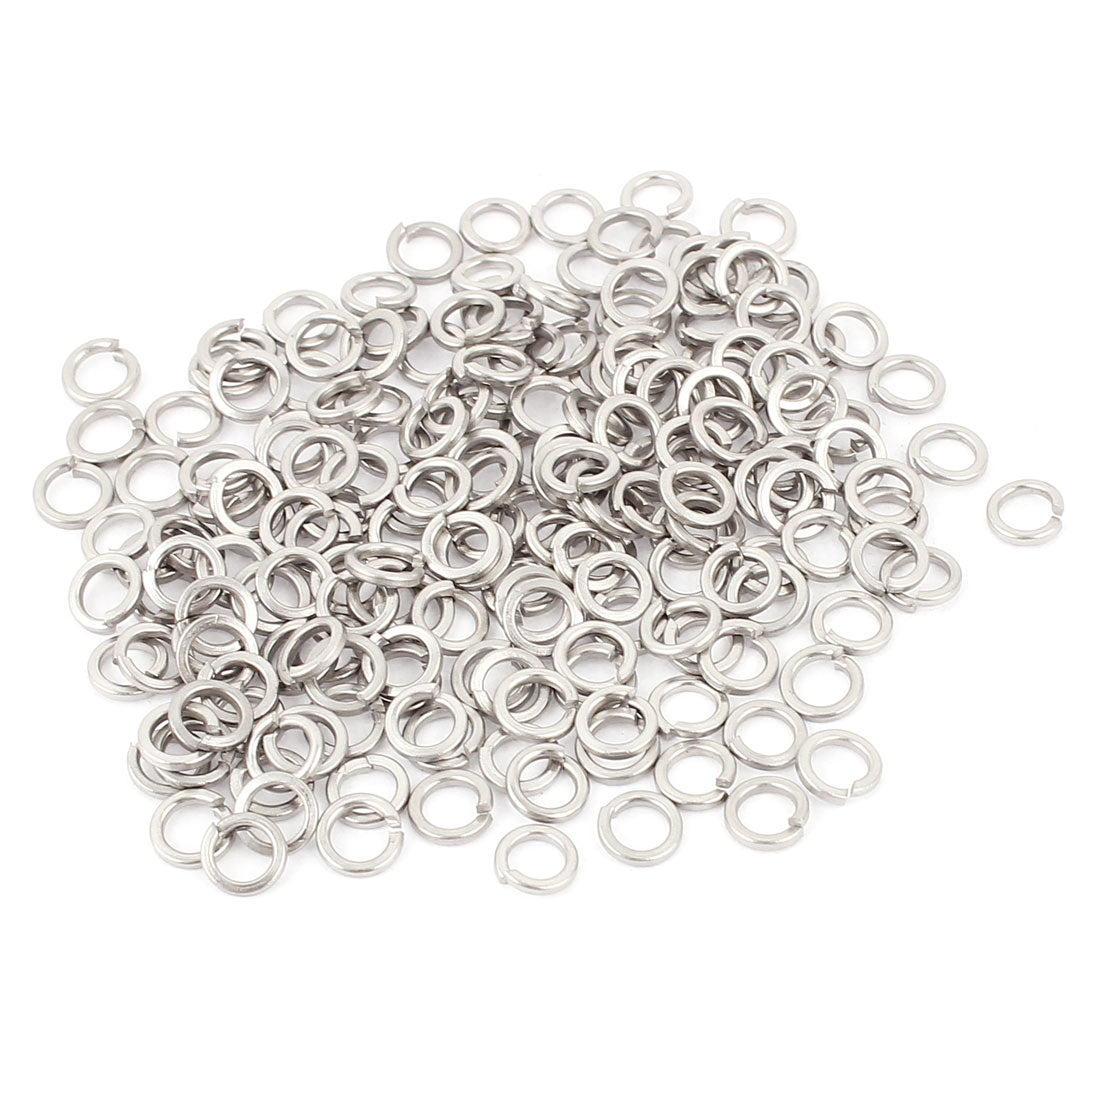 uxcell Uxcell Screw Bolt Stainless Steel M4 Split Lock Spring Washers Gasket 200pcs